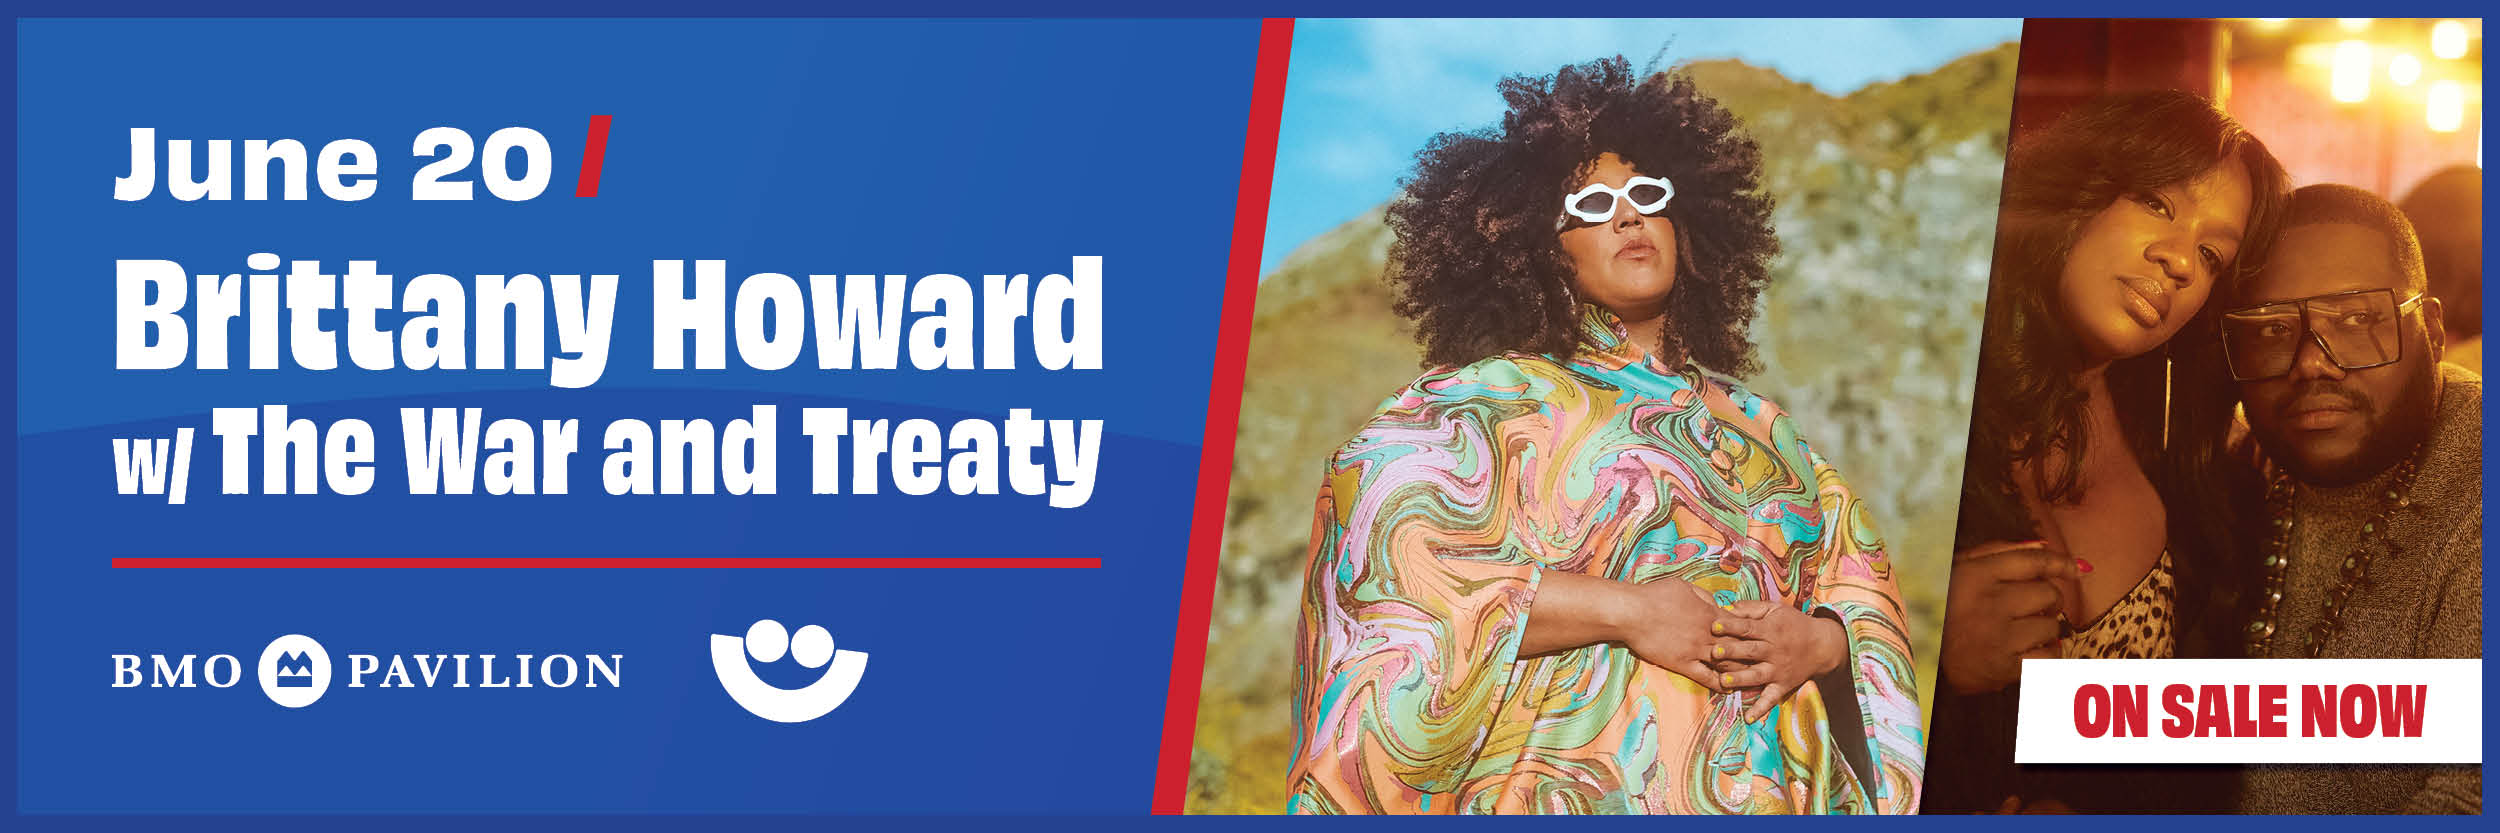 Brittany Howard with the war and treaty